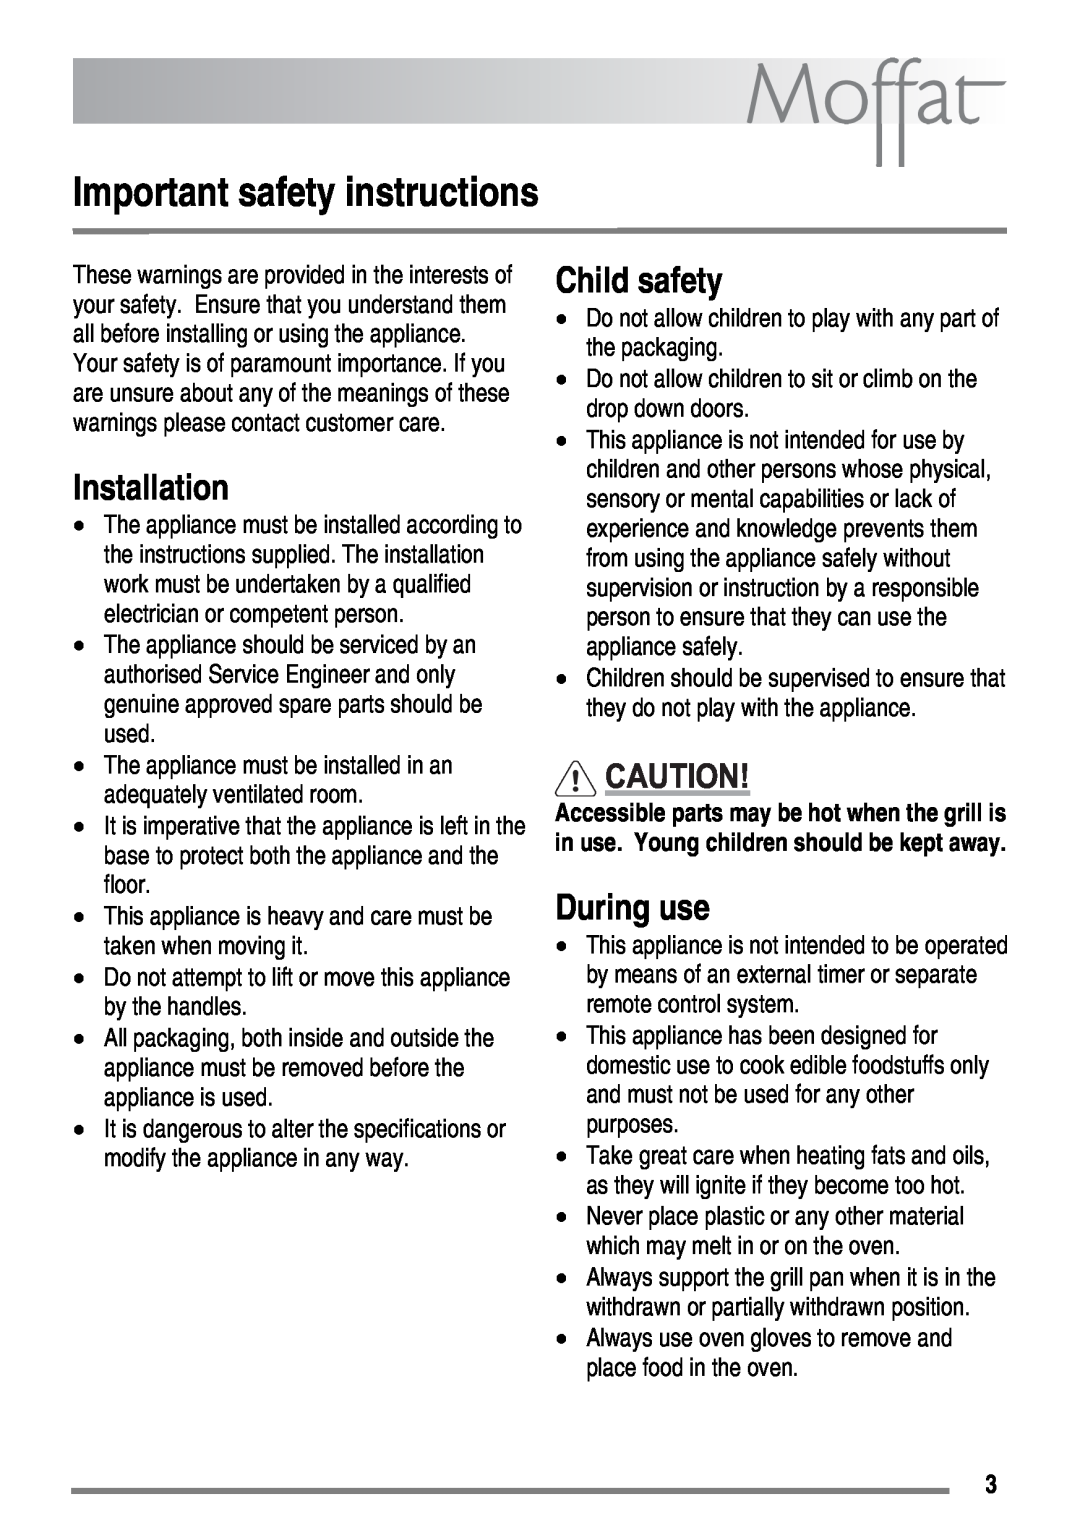 Moffat MDB900 user manual Important safety instructions, Installation, Child safety, During use 